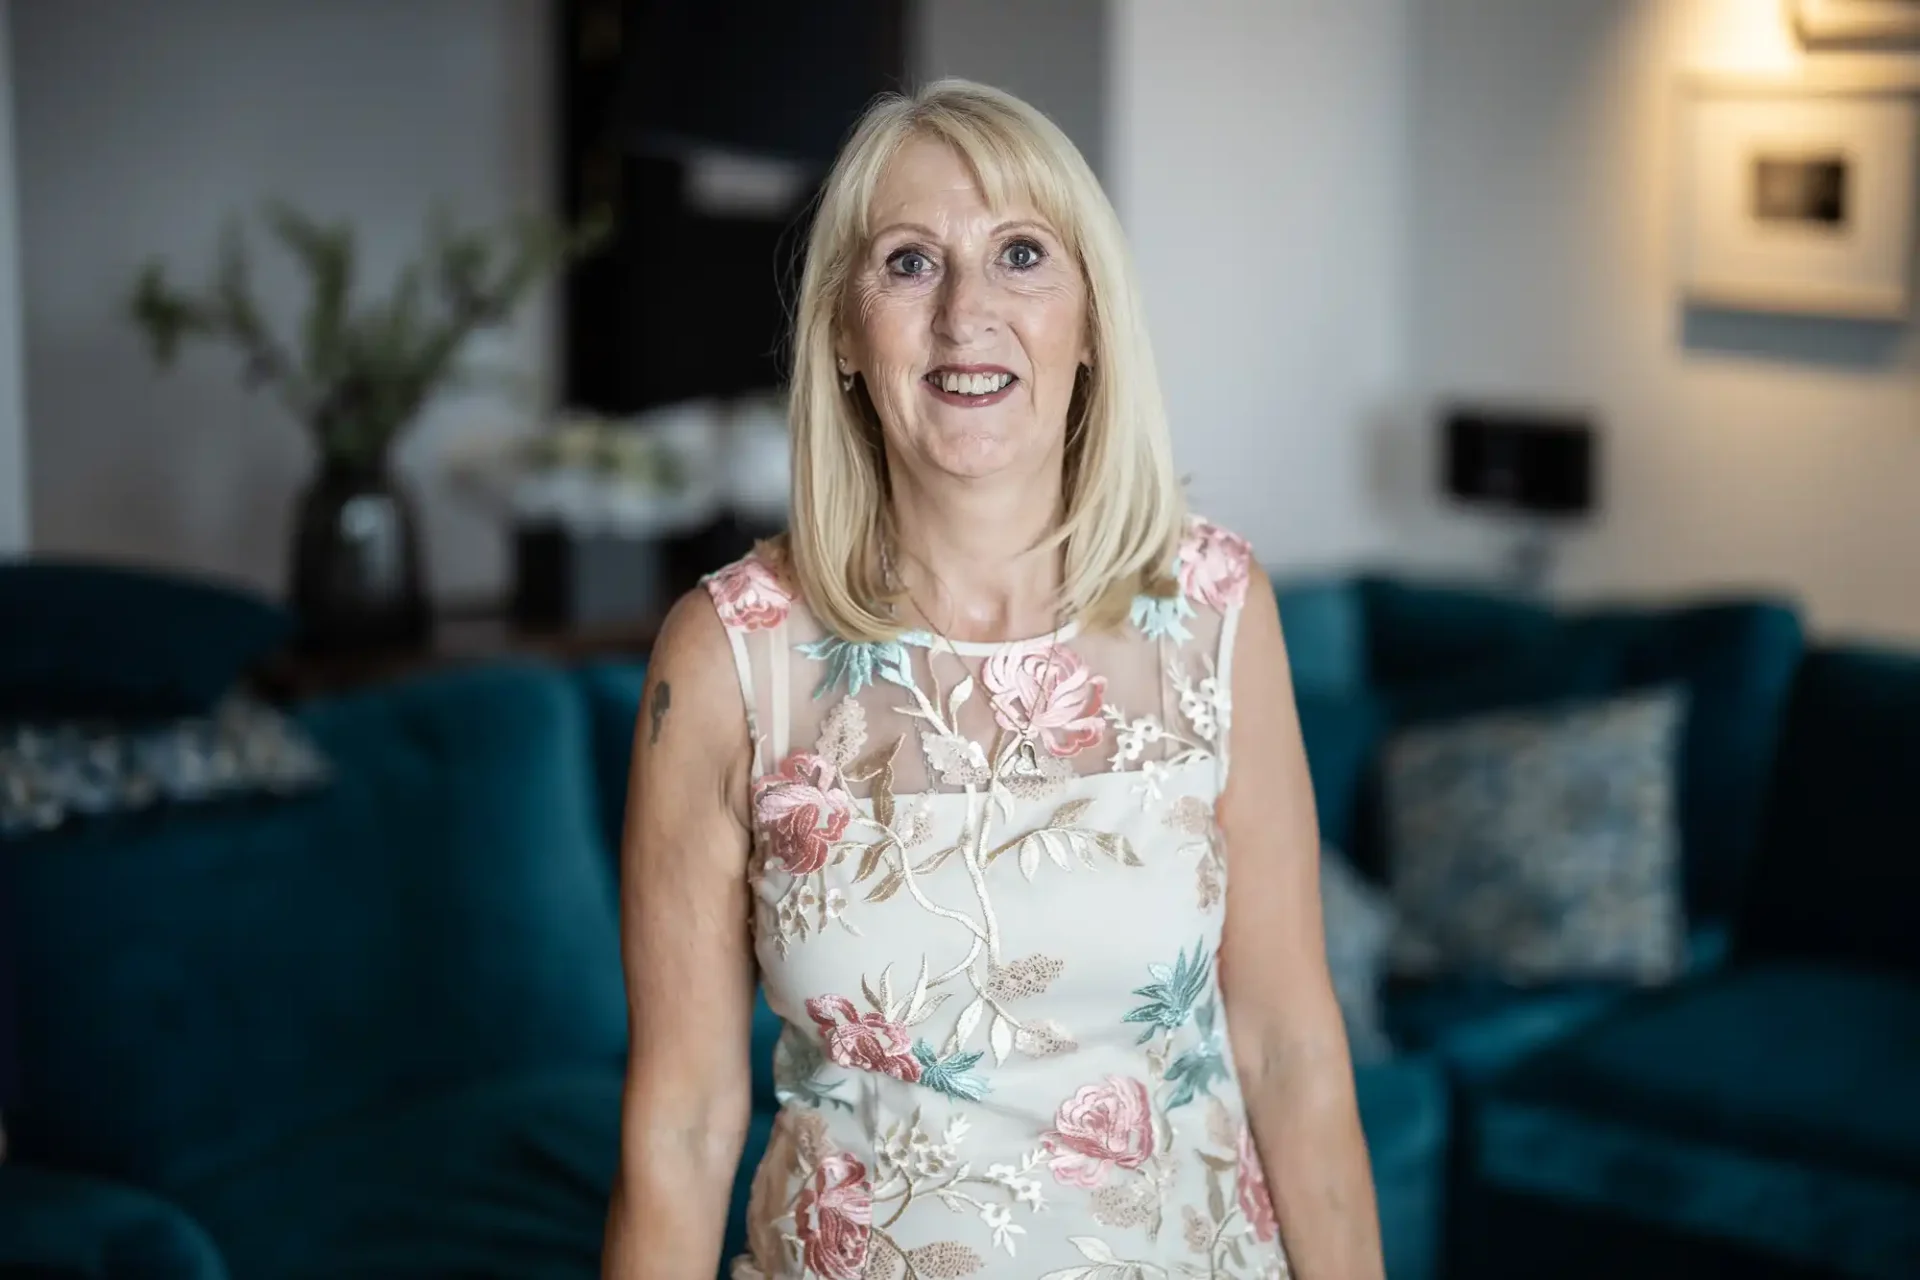 A smiling older woman with blonde hair wearing a floral dress standing in a room with blue sofas and a decorative background.